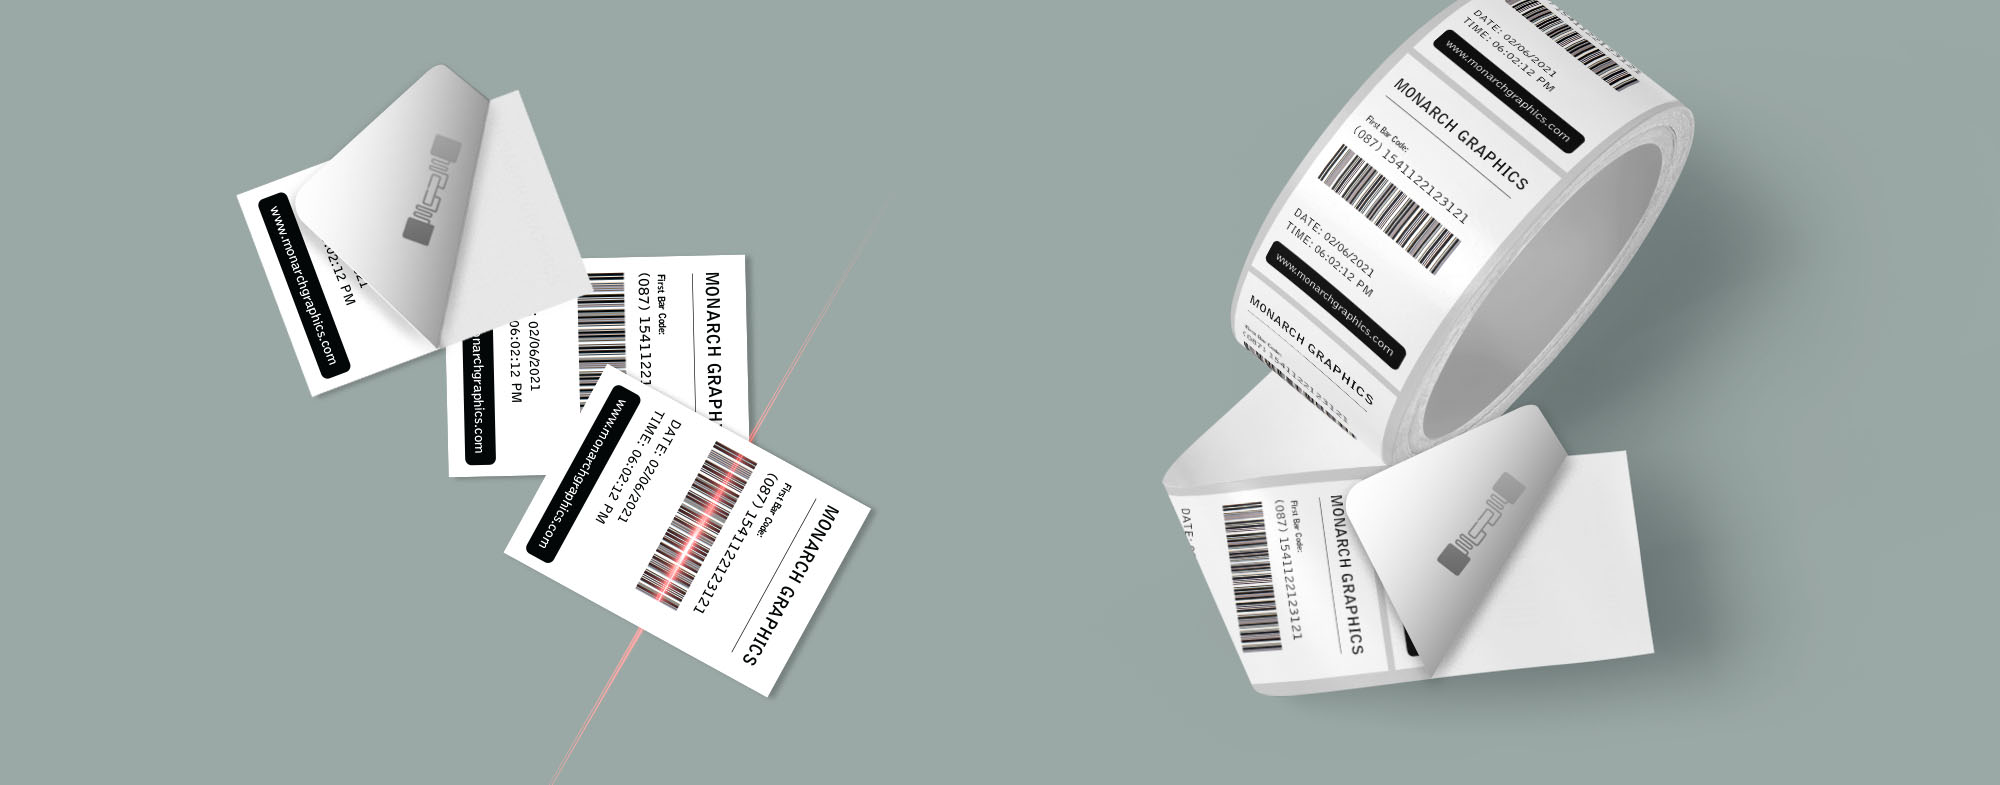 Track and Trace labels to detect tampering & build brand loyalty.